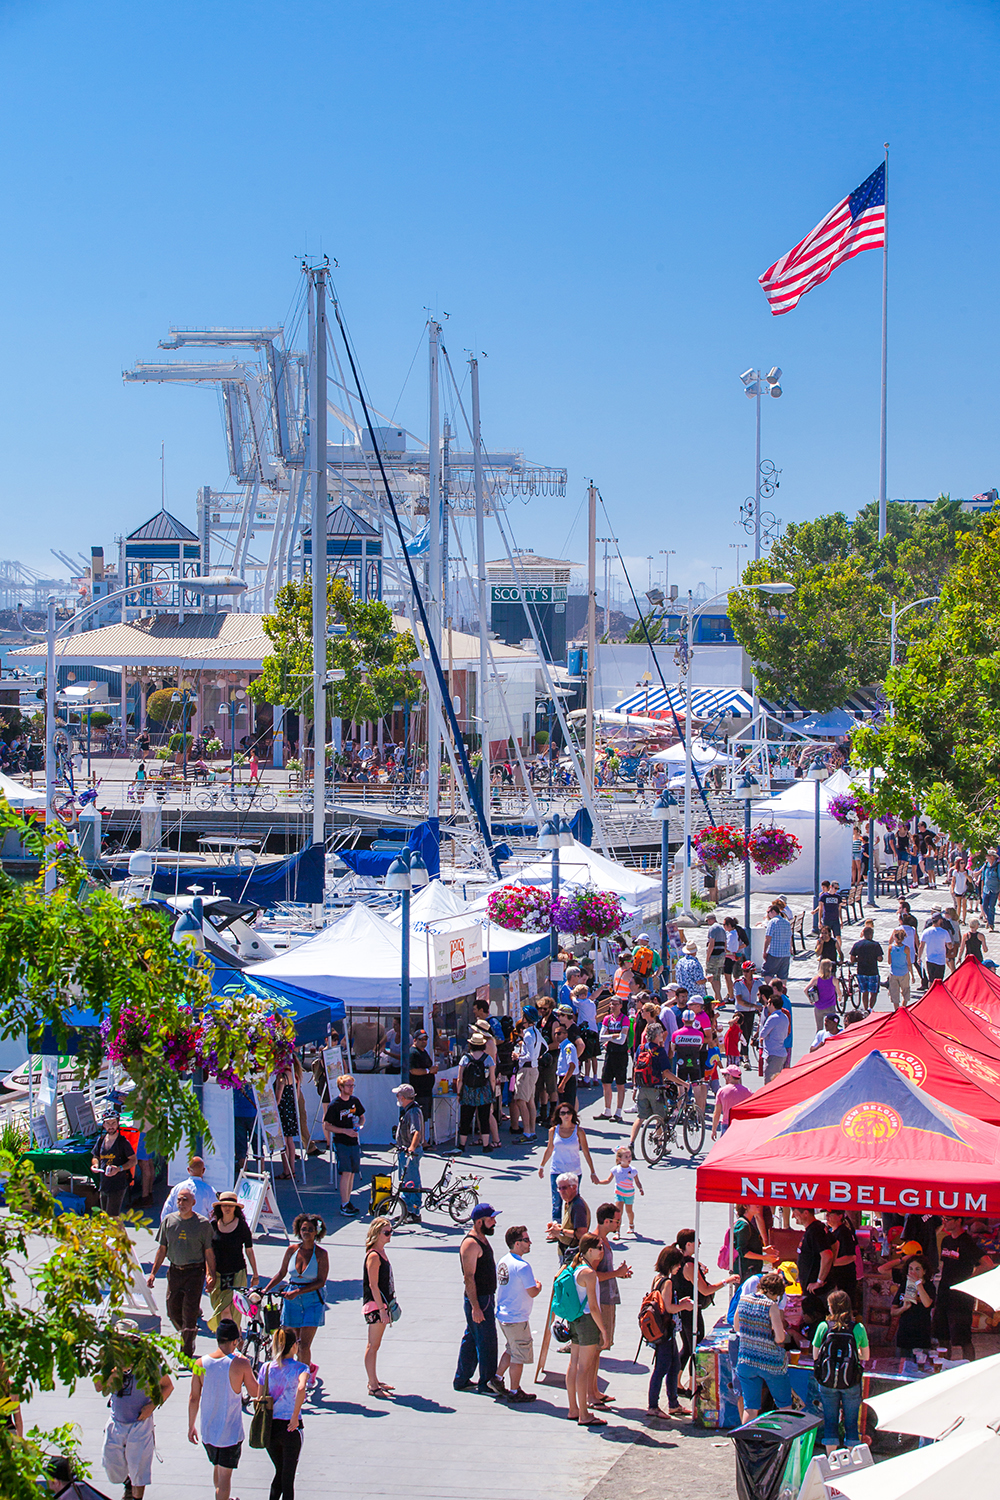 Jack London Square in Oakland, CA. PHOTO: Greg Linhares, City of Oakland